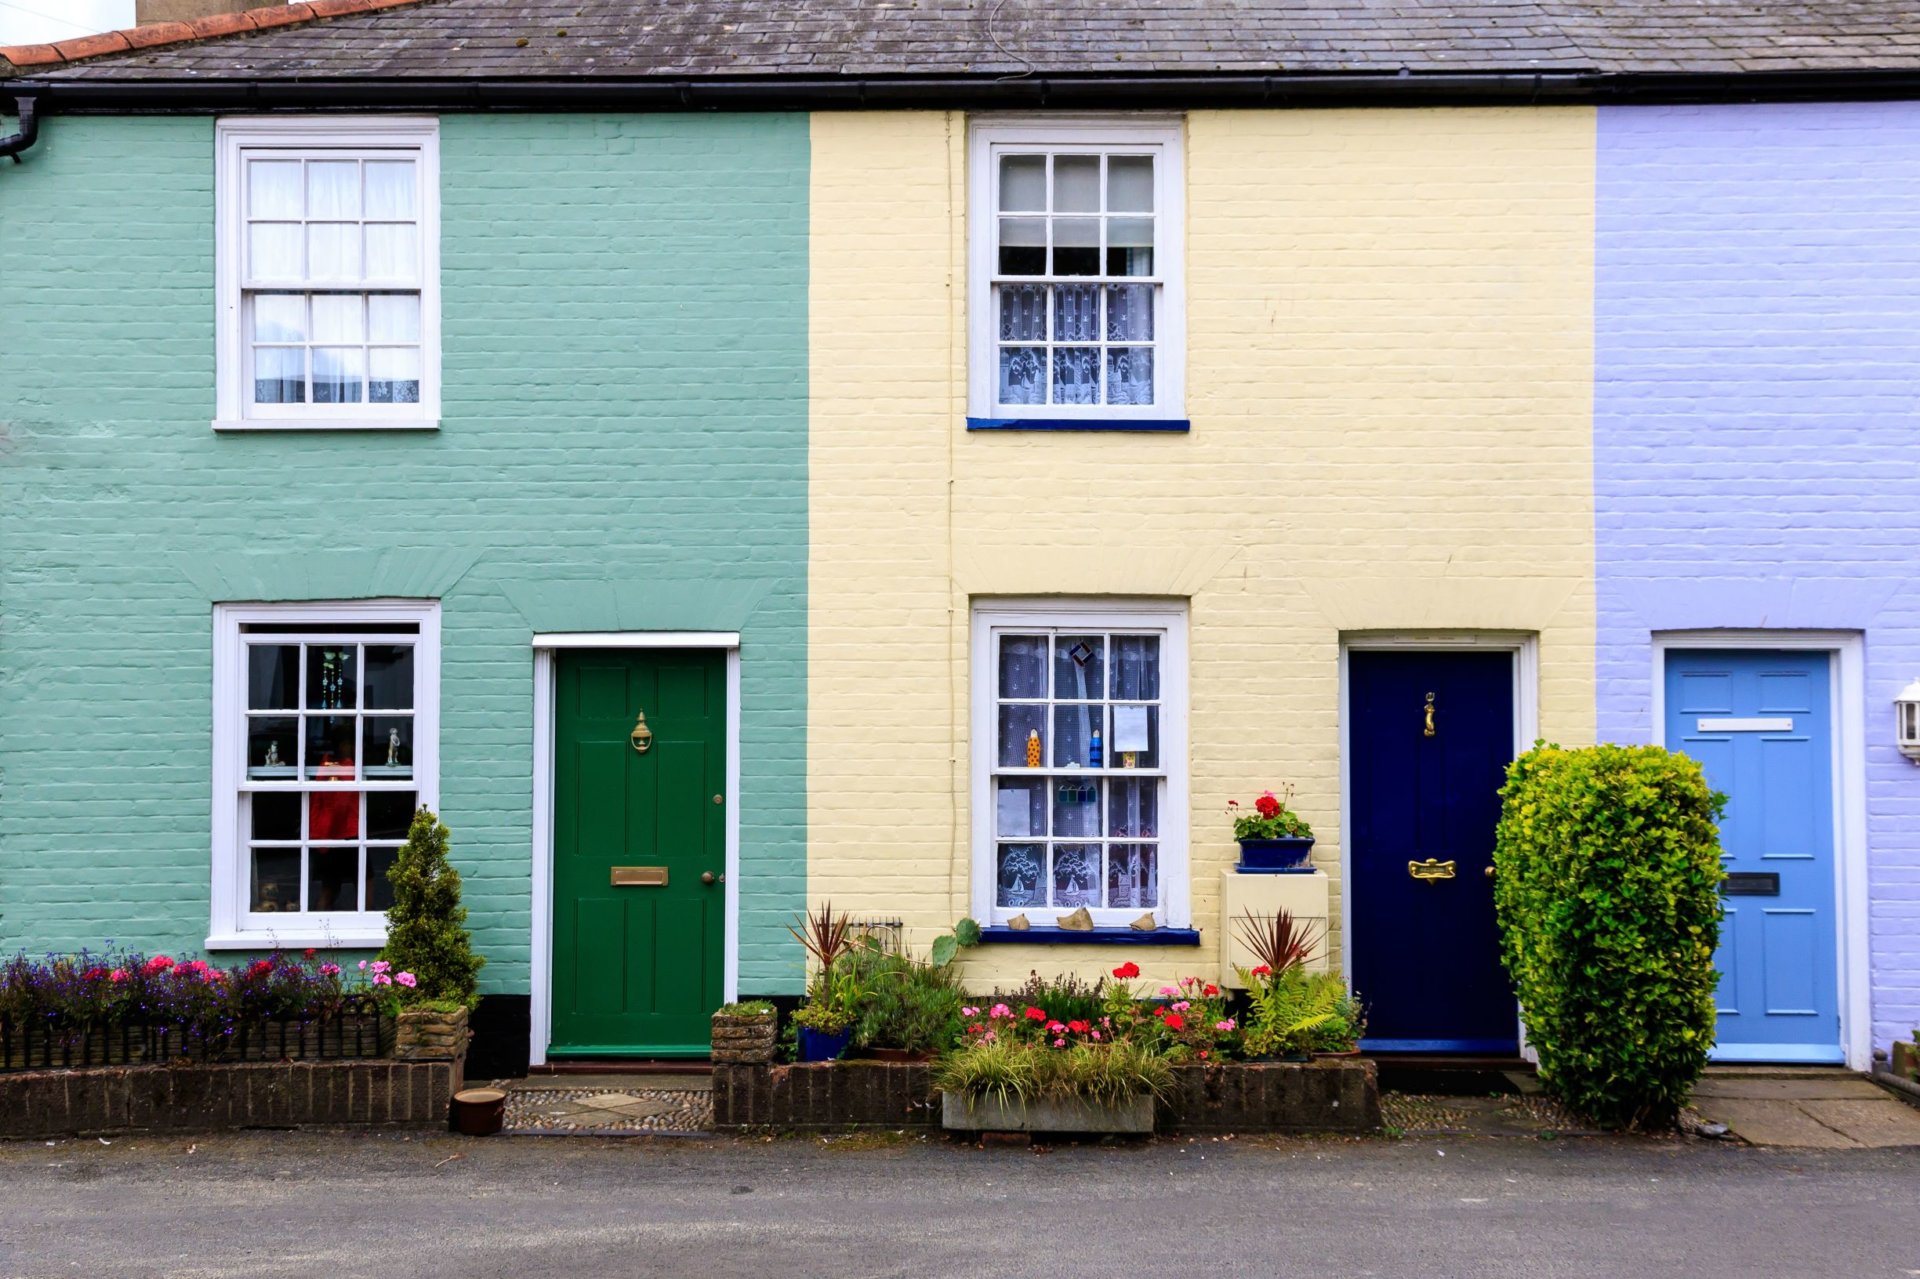 A row of terraced houses in Southwold, Suffolk, UK, painted green, cream, purple.